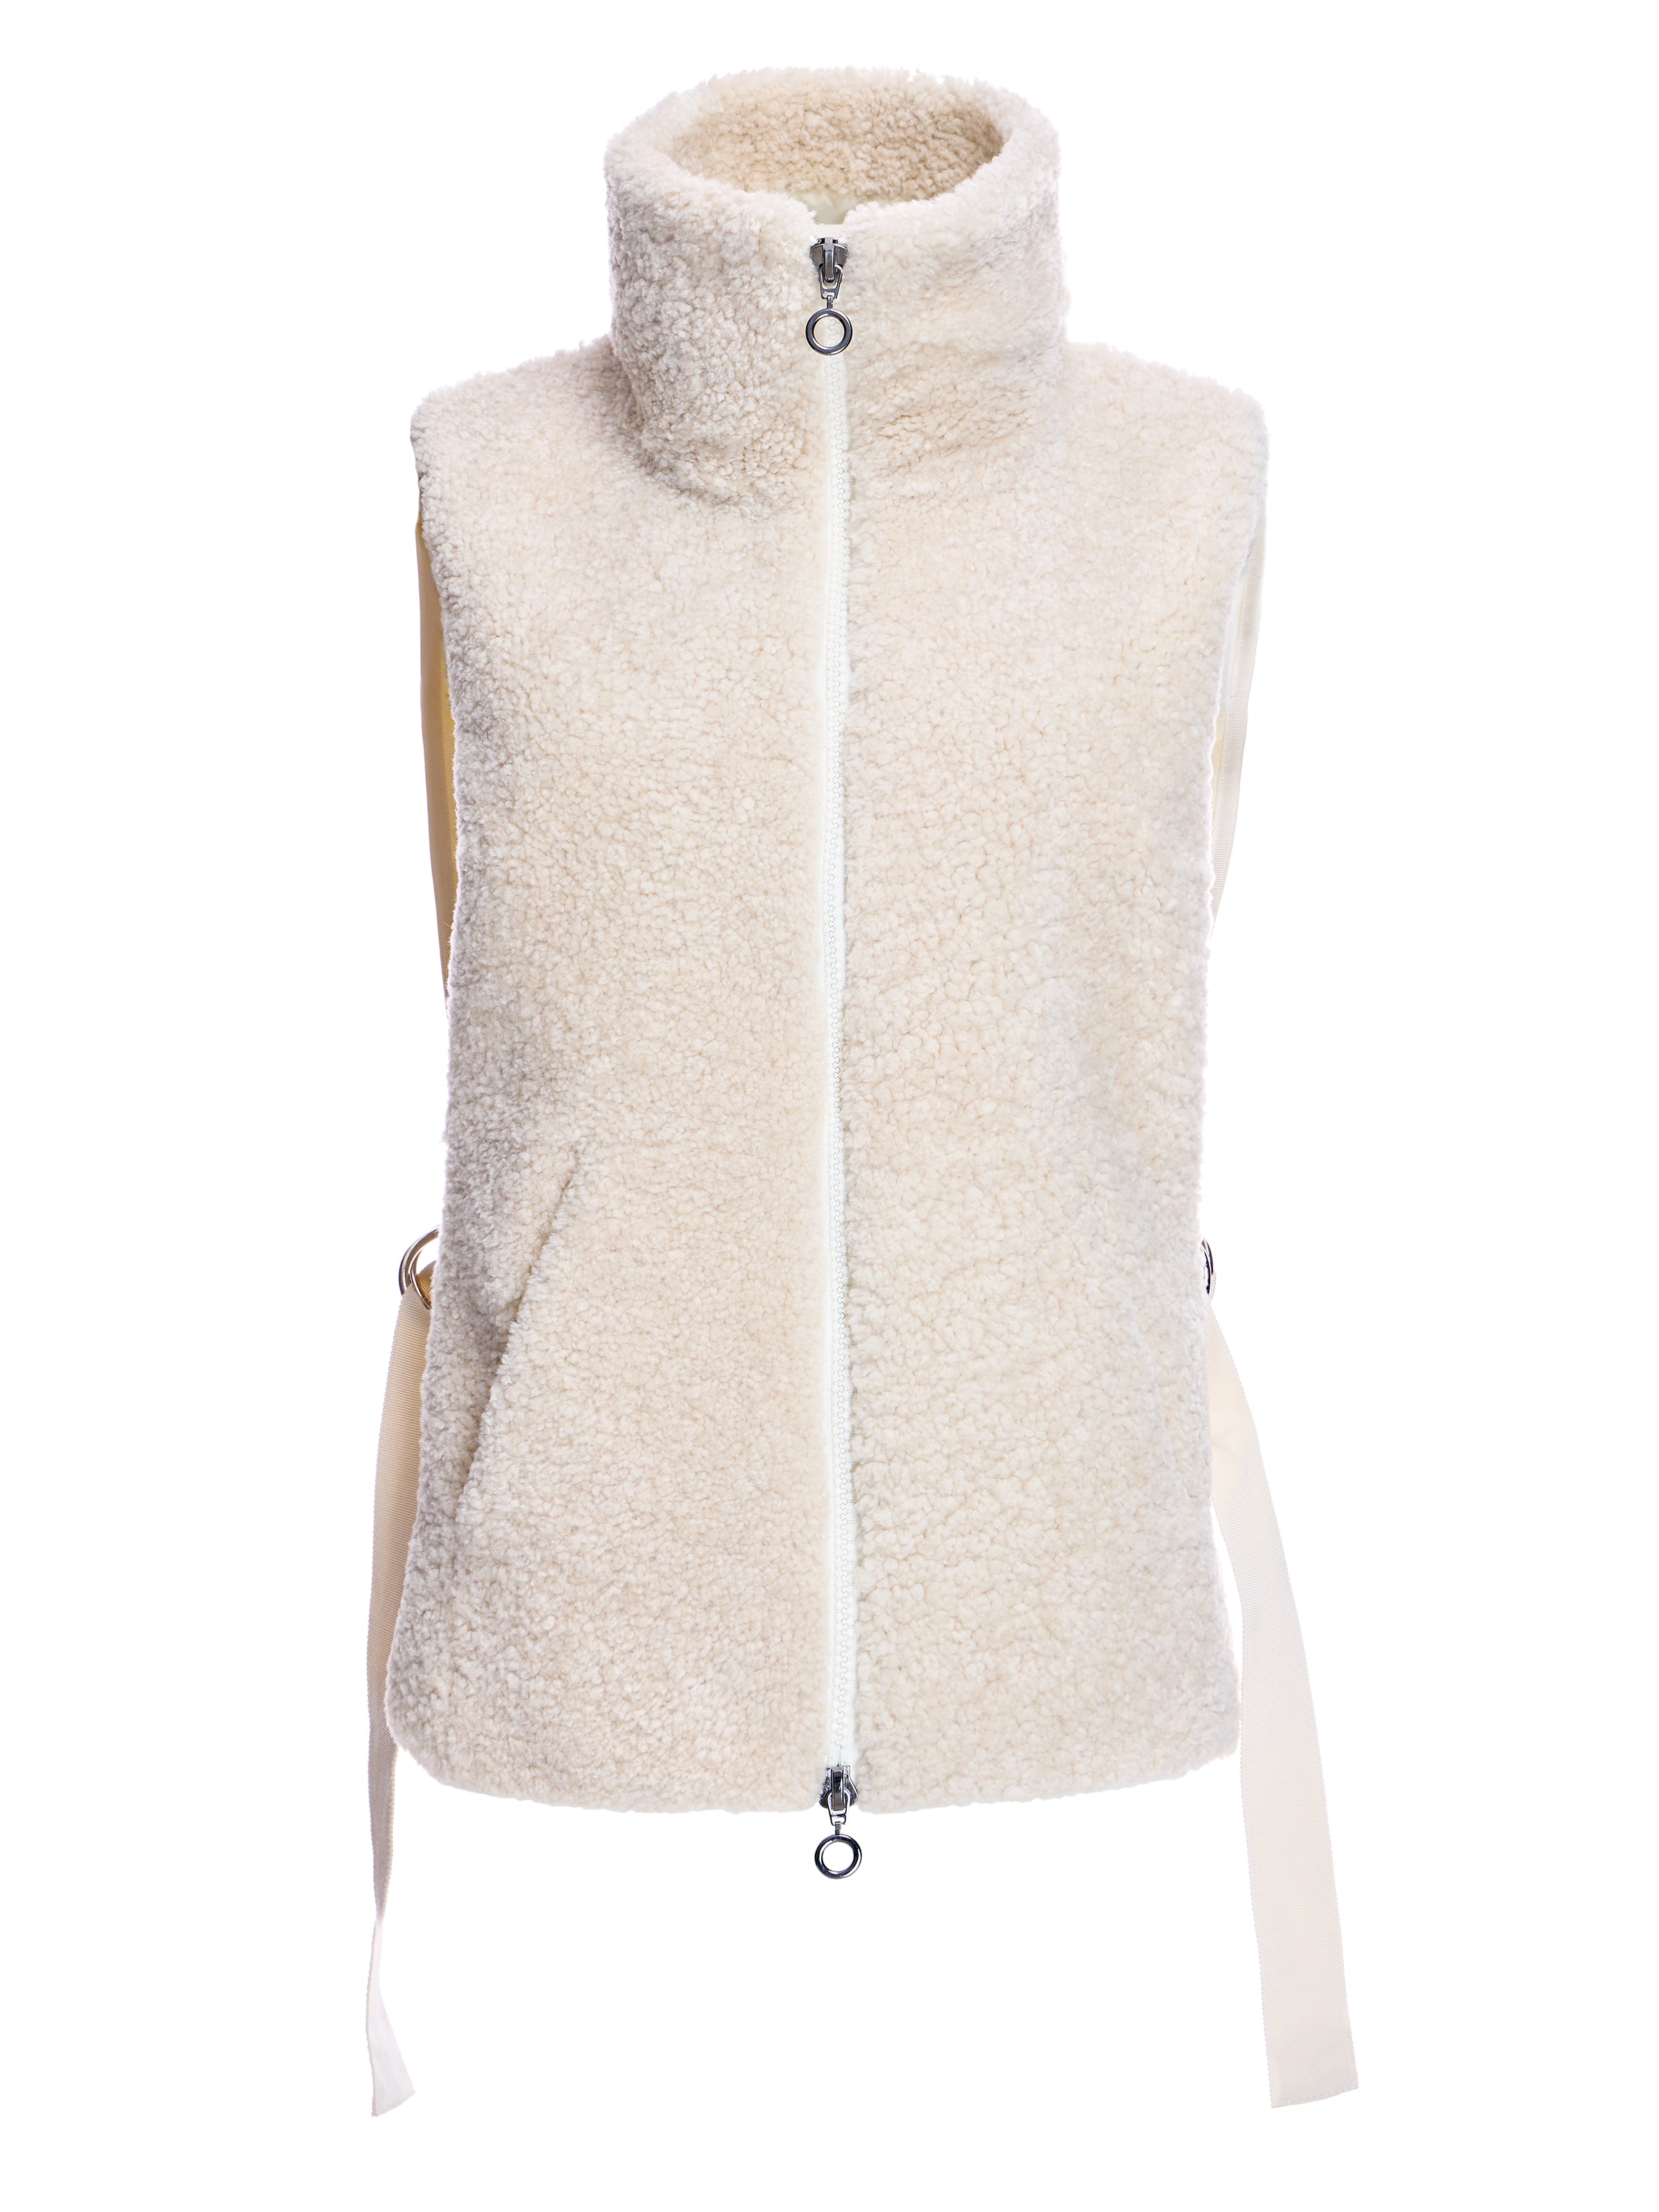 Shearling Lamb Vest with Poly Back